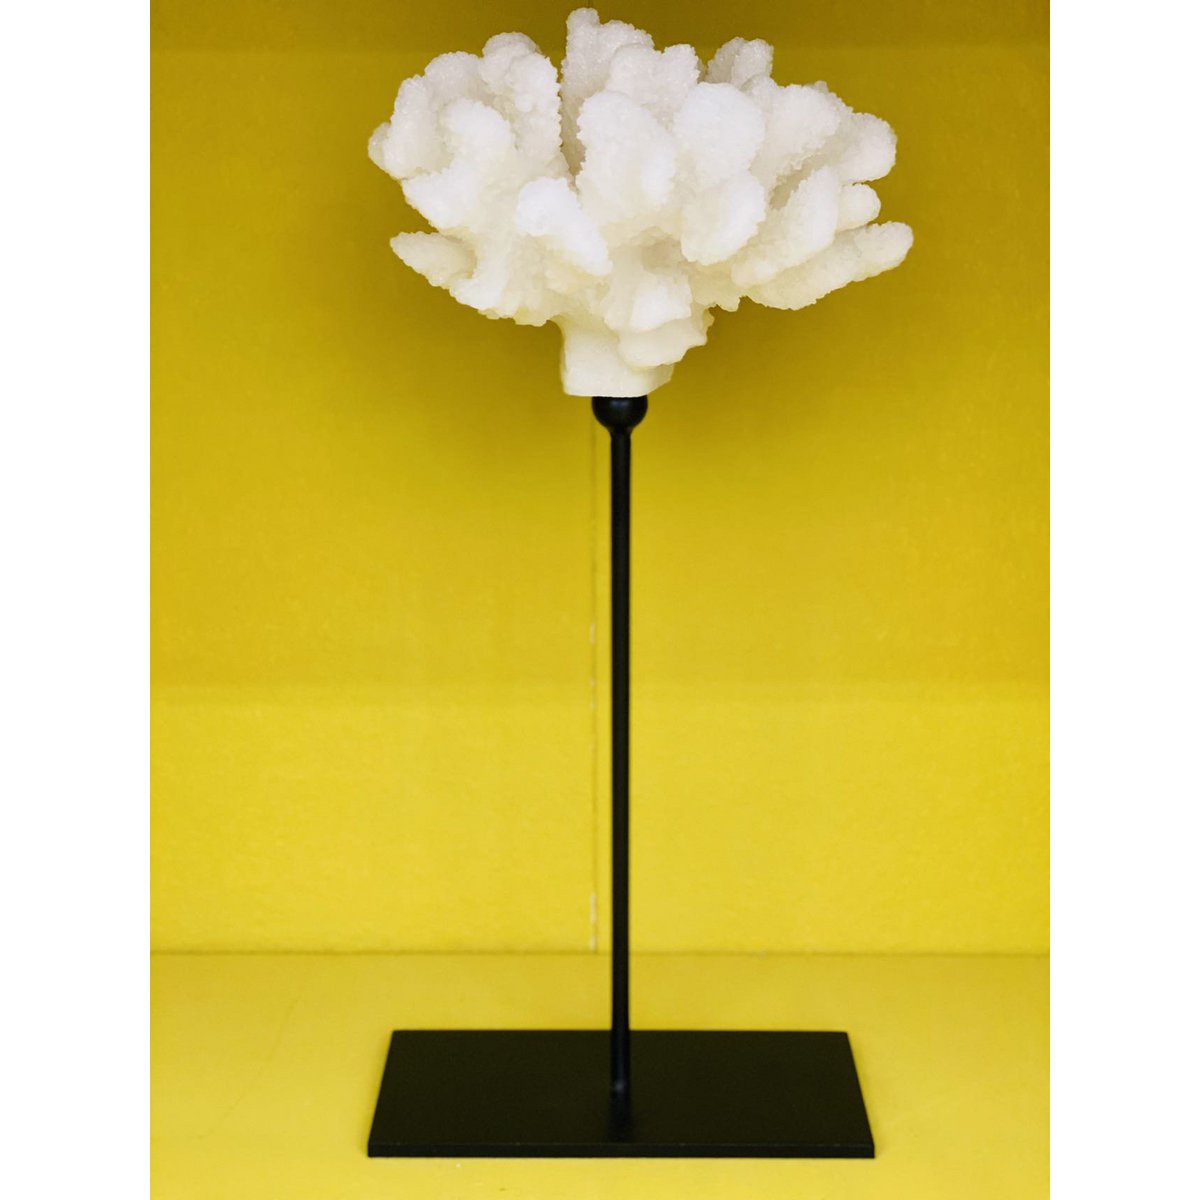 Coral collection with metal stand -s size:H25cm W15cm D15cm